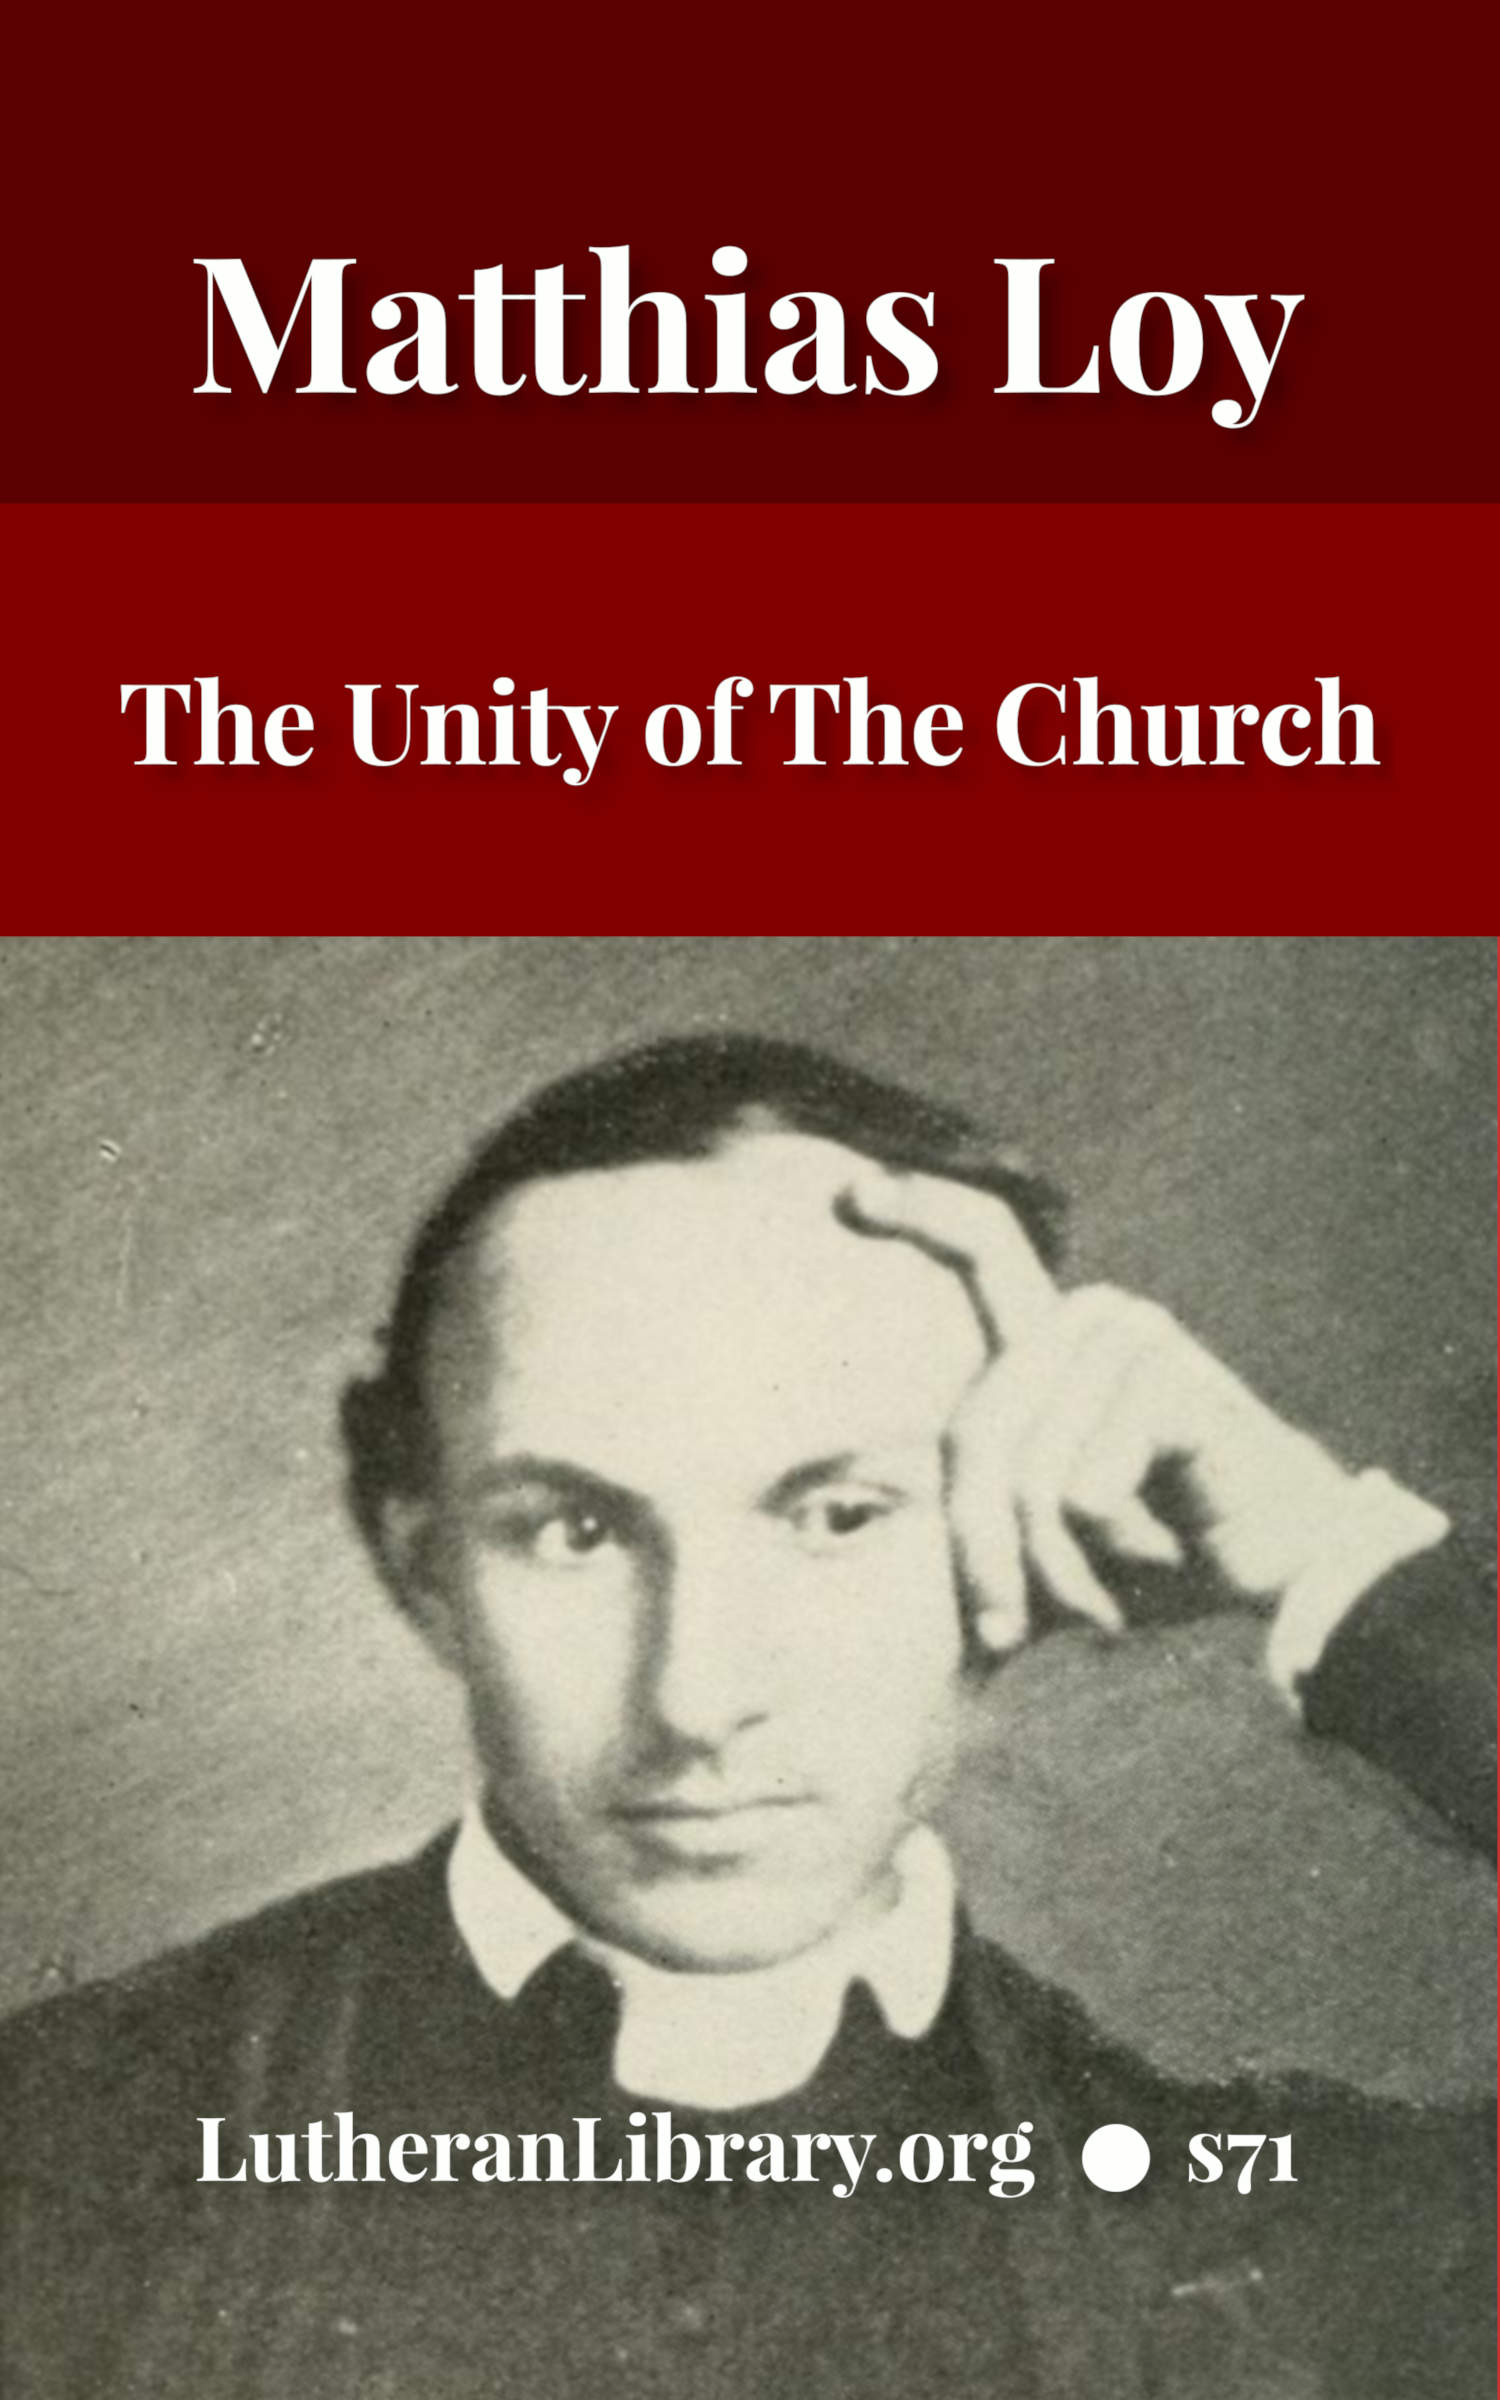 The Unity of the Church by Matthias Loy